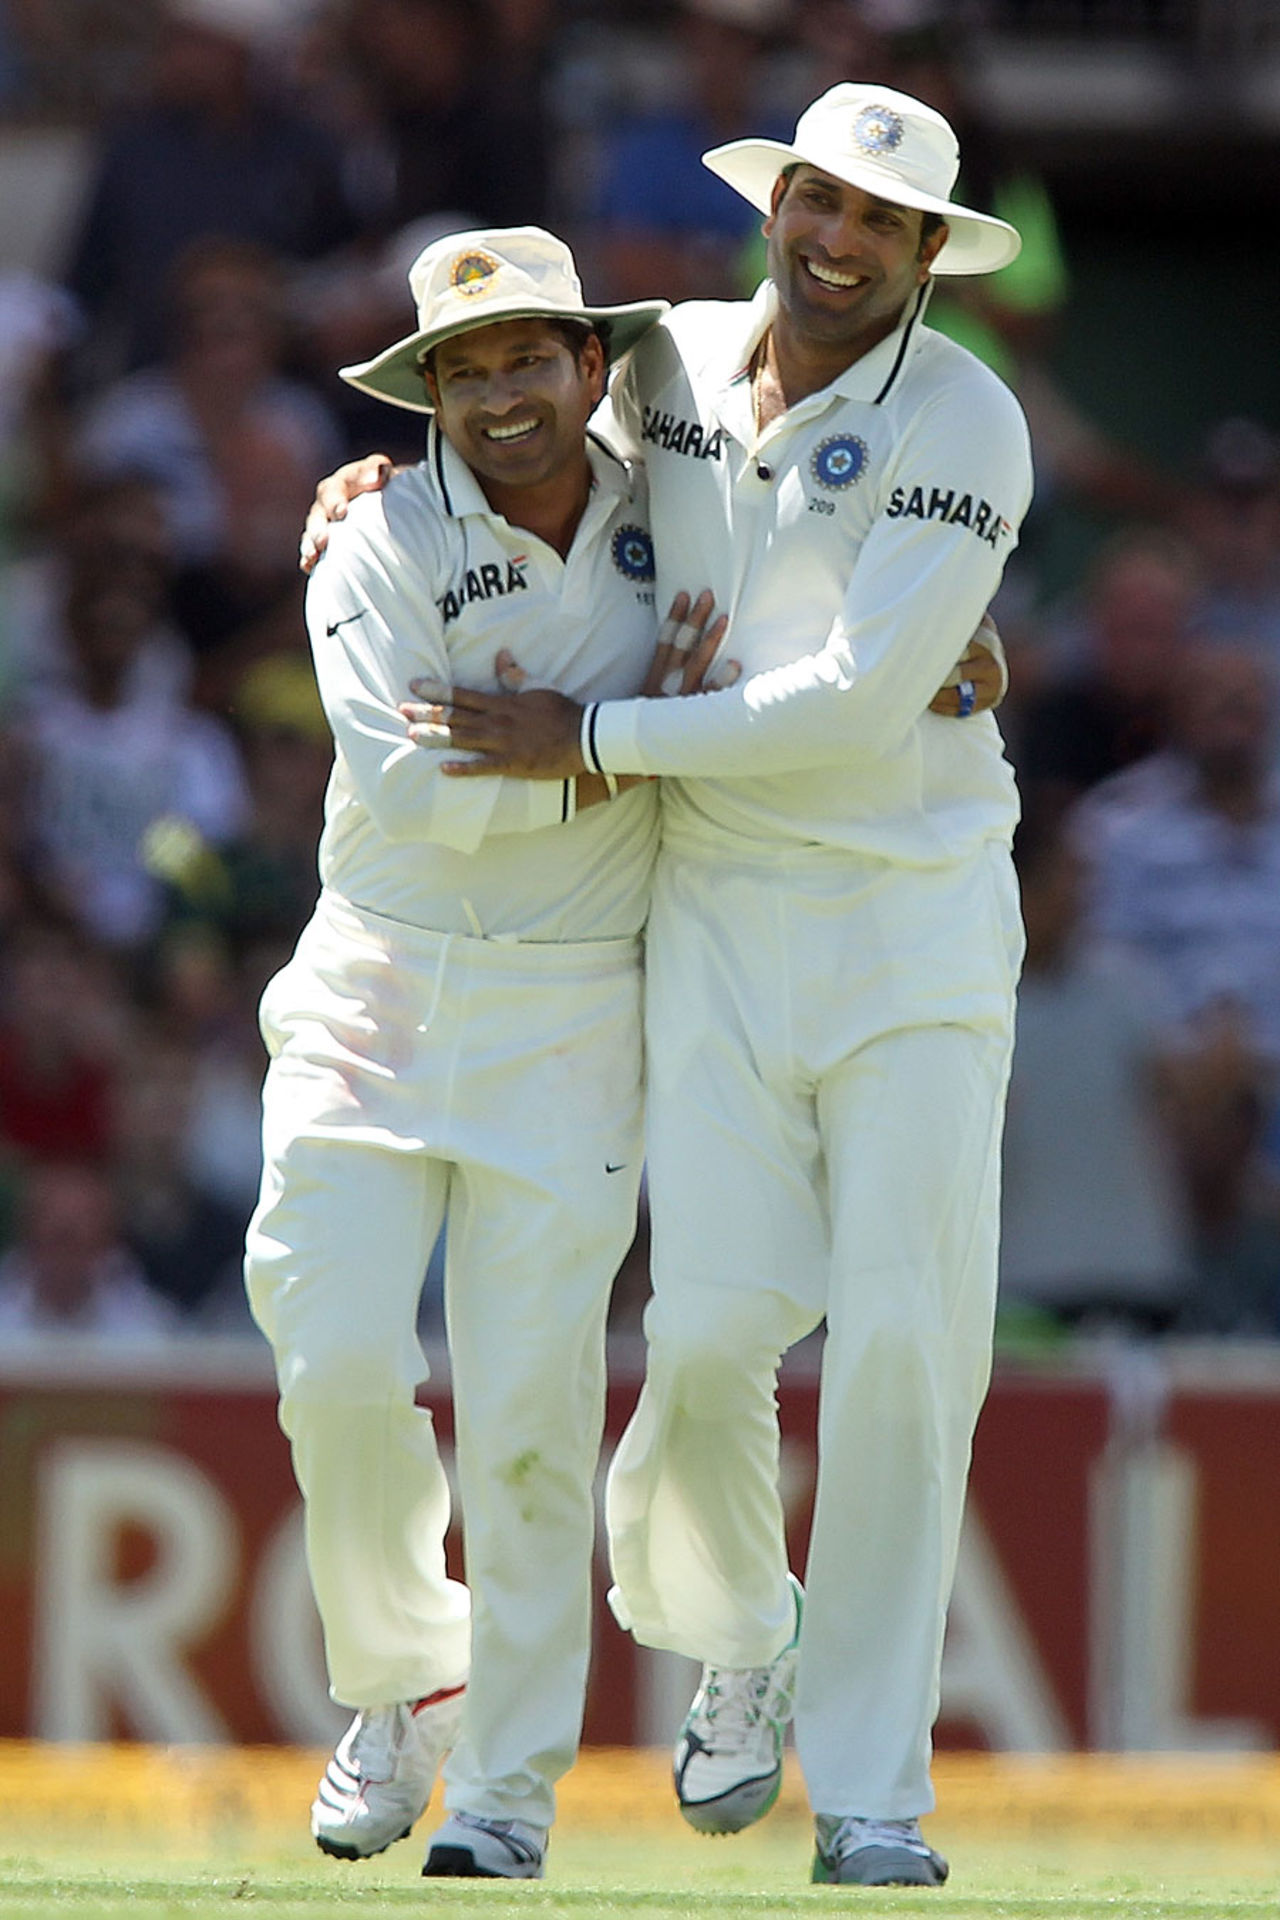 VVS Laxman took a smart catch to get rid of Ed Cowan, Australia v India, 4th Test, Adelaide, 1st day, January 24, 2012